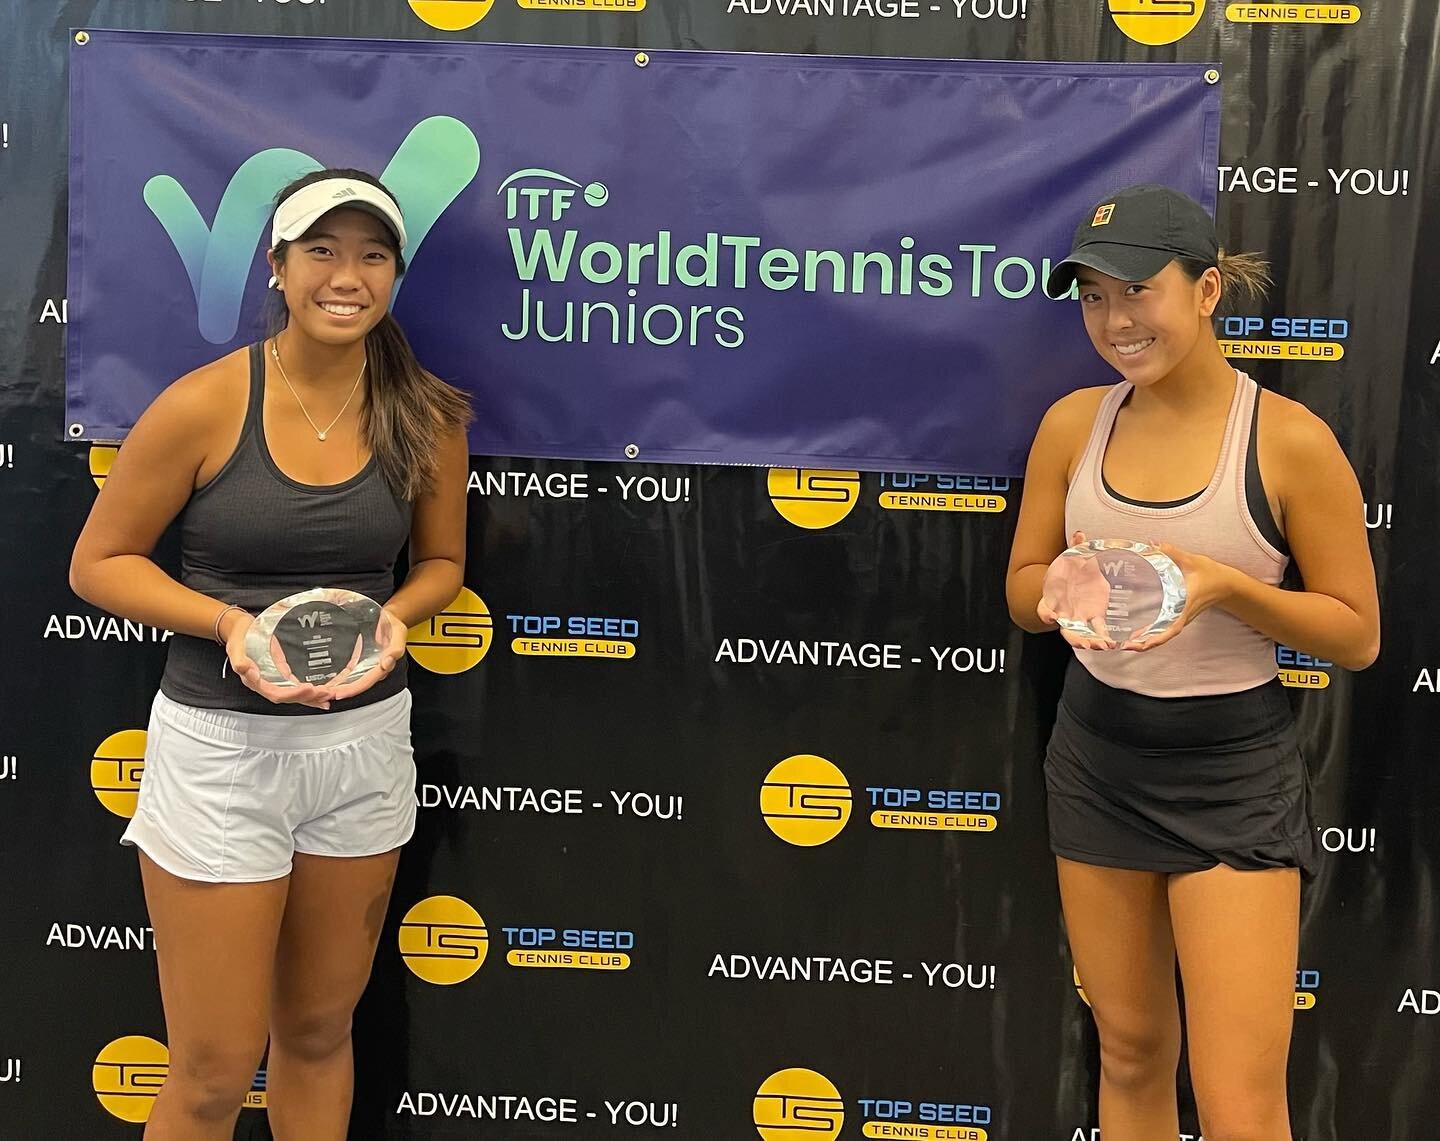 ITF J4 Doubles Title ✅ | ITF J1 Doubles Title ✅ | Win first WTA Point in Doubles ✅

Congratulations to NO QUIT &amp; TEAM BRYAN player Jessica Bernales for claiming TWO ITF doubles titles in Texas &amp; Kentucky and securing her FIRST WTA point here 